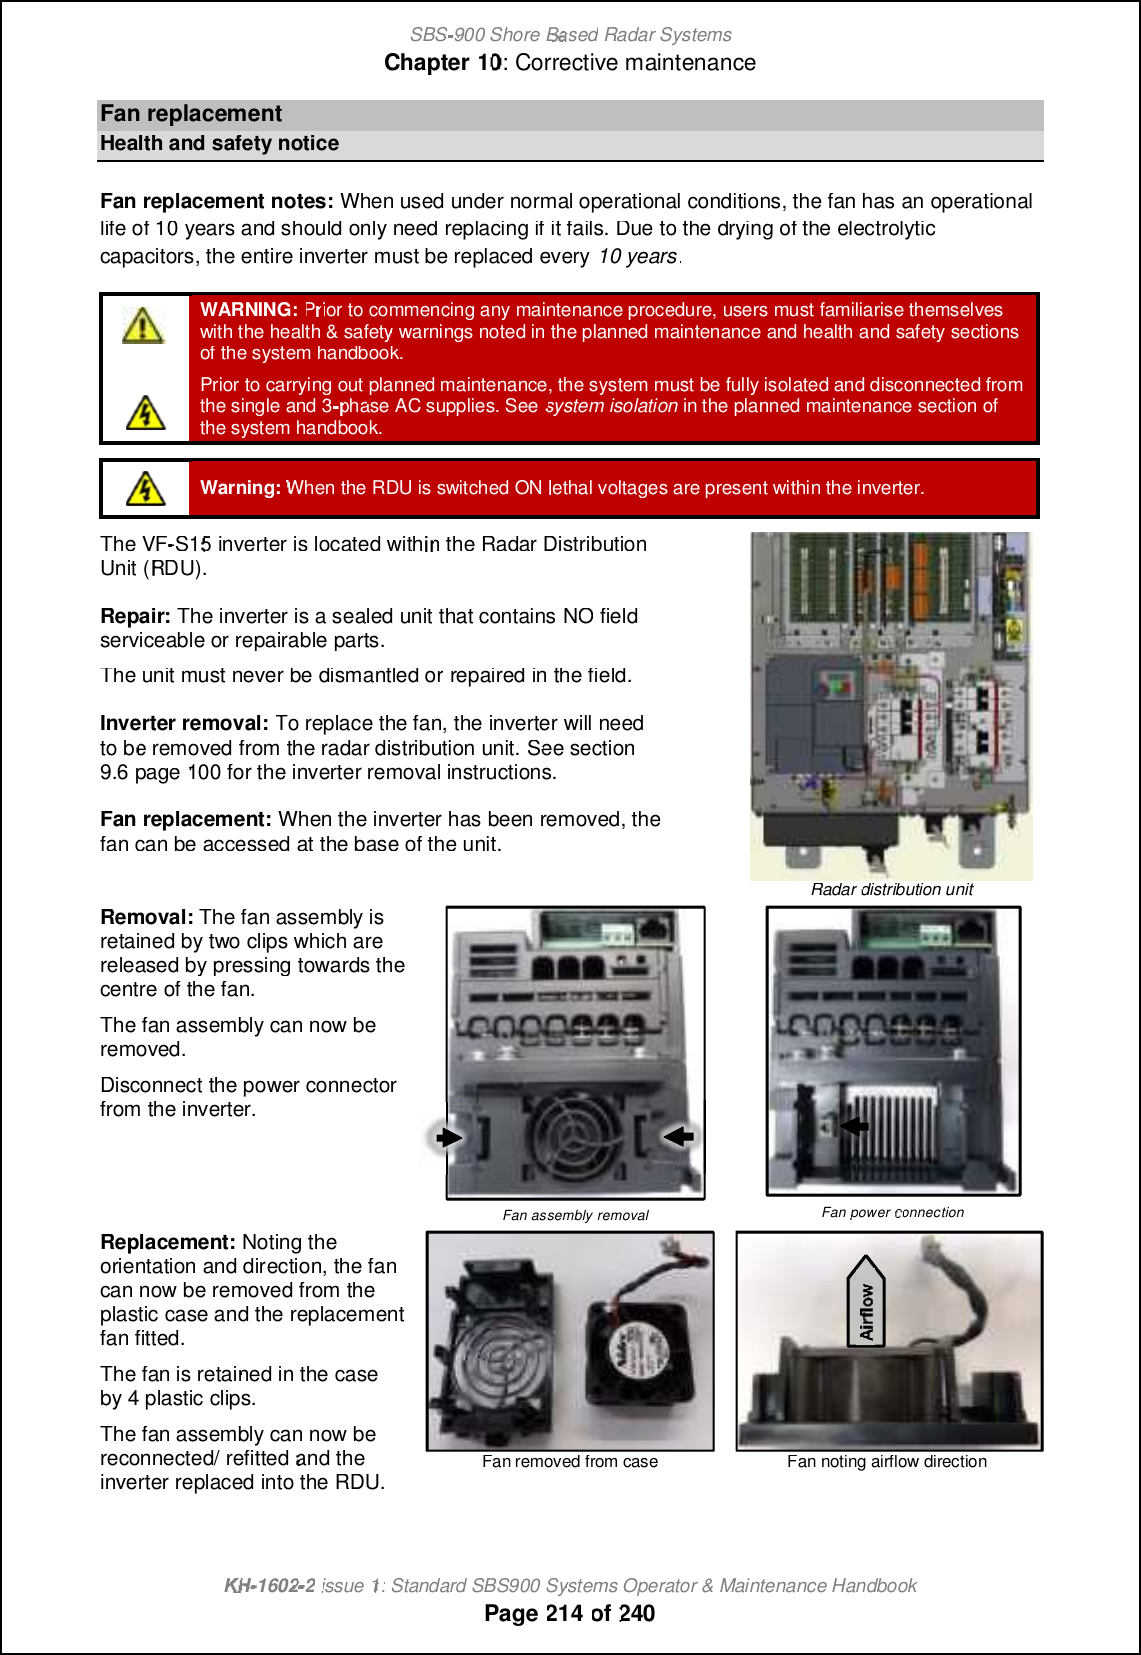 SBS-900 ShoreBaBasedRadar SystemsChapter1010:Corrective maintenanceKHKH-1602 2issue 1:Standard SBS900 Systems Operator &amp; Maintenance HandbookPage214of240FanreplacementHealth and safety noticeFan replacement notes:When used under normal operational conditions, the fan has an operationallife of 10 years and should only need replacing if it fails. Due to the drying of the electrolyticcapacitors, the entire inverter must be replaced every10 years.WARNING:PrPrior to commencing any maintenance procedure, users must familiarise themselveswith the health &amp; safety warnings noted in the planned maintenance and health and safety sectionsof the system handbook.Prior to carrying out planned maintenance, the system must be fully isolated and disconnected fromthe single and 3phase AC supplies. Seesystem isolationin the planned maintenance section ofthe system handbook.Warning:When the RDU is switched ONlethal voltages are present within the inverter.The VF-S1S15inverter is located within theRadar DistributionUnit (RDU).Repair:The inverter is a sealed unit that containsNONOfieldserviceable or repairable parts.The unit must never be dismantled orrepaired in the field.Inverter removal:To replace the fan, the inverter will needtobe removed from the radar distribution unit.See section9.6page100for the inverter removal instructions.Fan replacement:When the inverter has been removed, thefan can be accessed at the base of the unit.Radardistribution unitRemoval:The fan assembly isretained by two clips which arereleased by pressing towards thecentre of the fan.The fan assembly can now beremoved.Disconnect the power connectorfrom the inverter.Fan assembly removalFanpowerconnectionReplacement:Noting theorientation and direction, the fancan now be removed from theplastic case and the replacementfan fitted.The fan is retained in the caseby 4 plastic clips.The fan assembly can now bereconnected/ refittedand theinverter replaced into the RDU.Fan removed from caseFan noting airflow direction